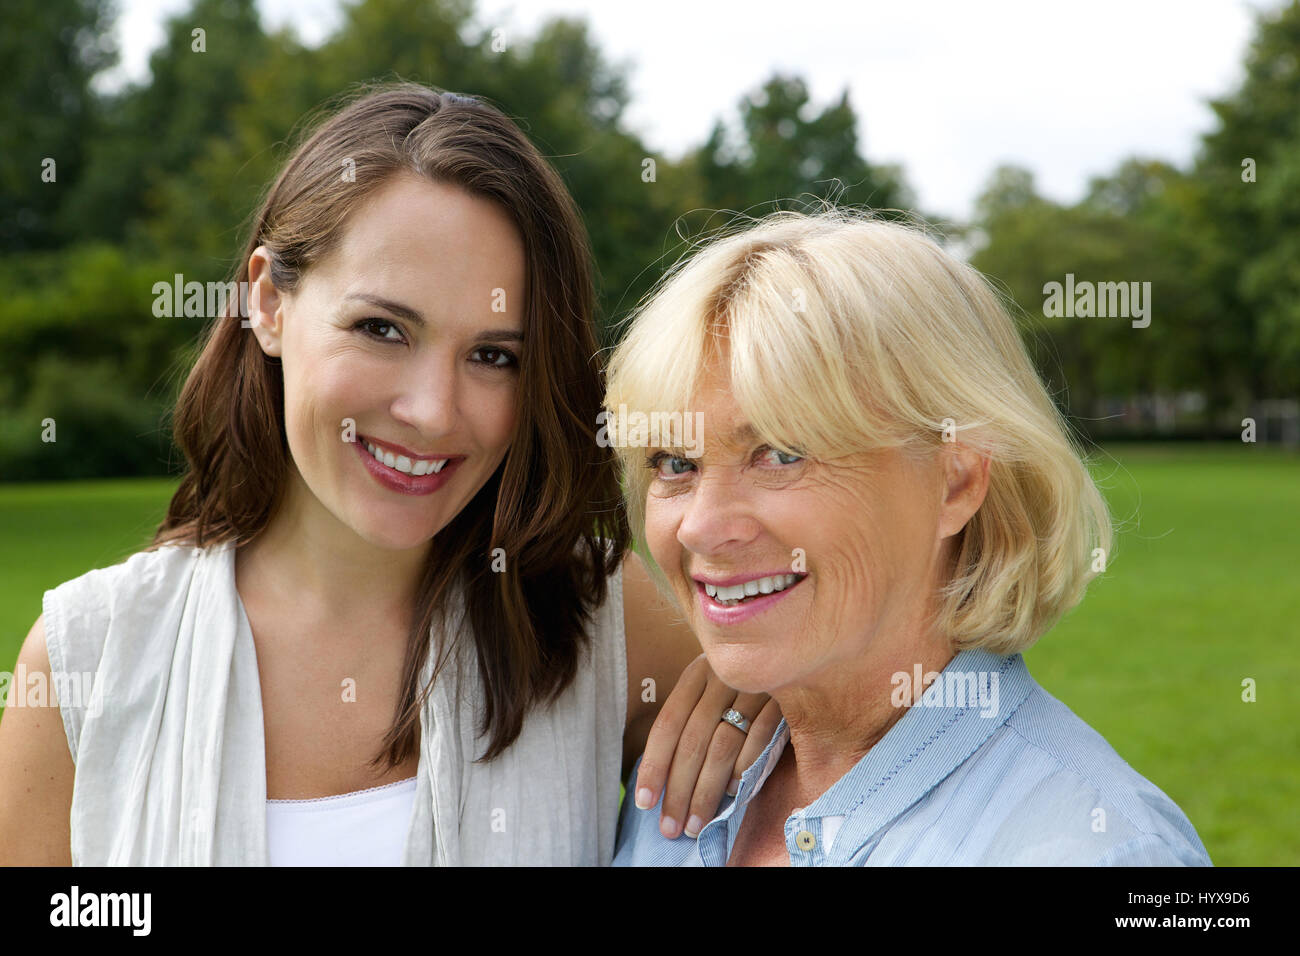 Close up portrait of a mother and older daughter smiling together Stock Photo